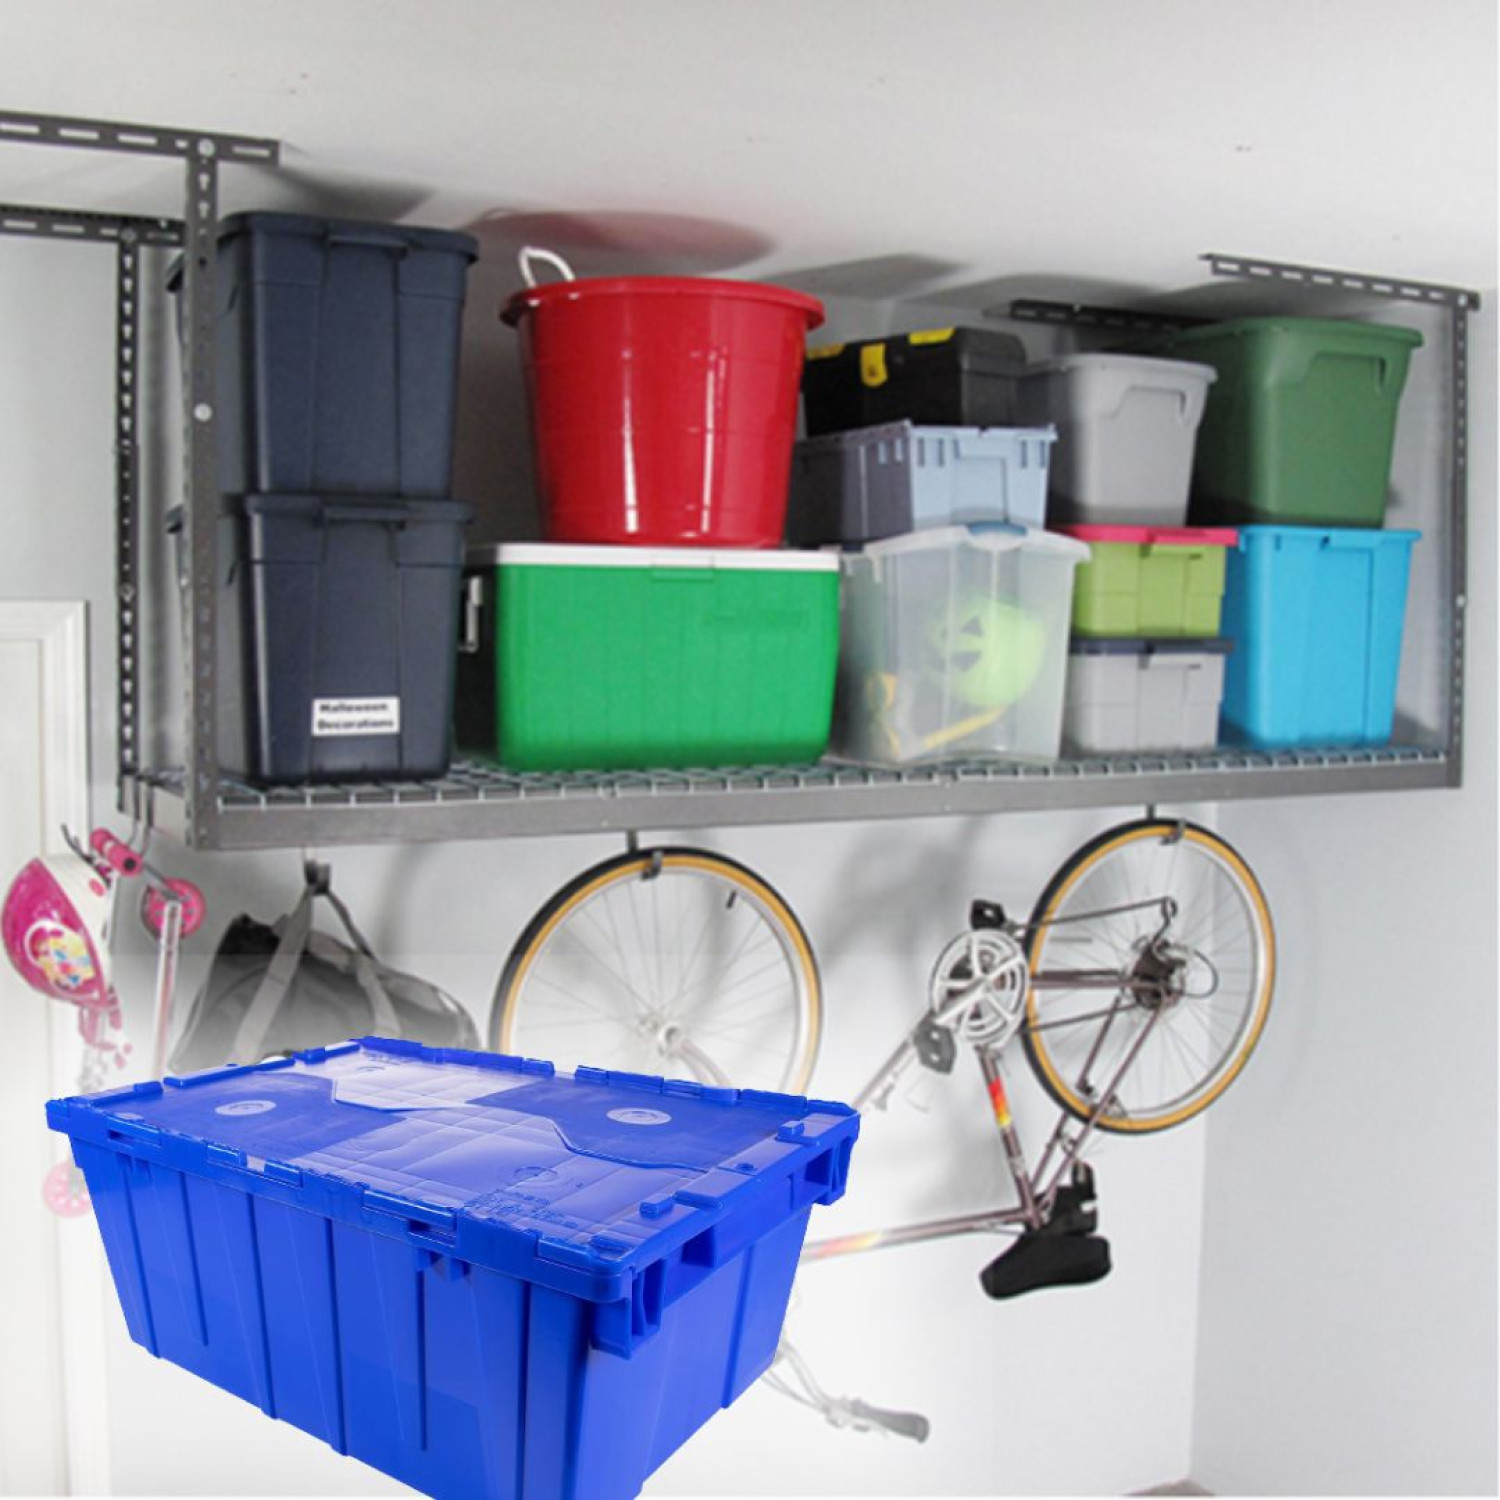 Large plastic containers and Industrial plastic containers